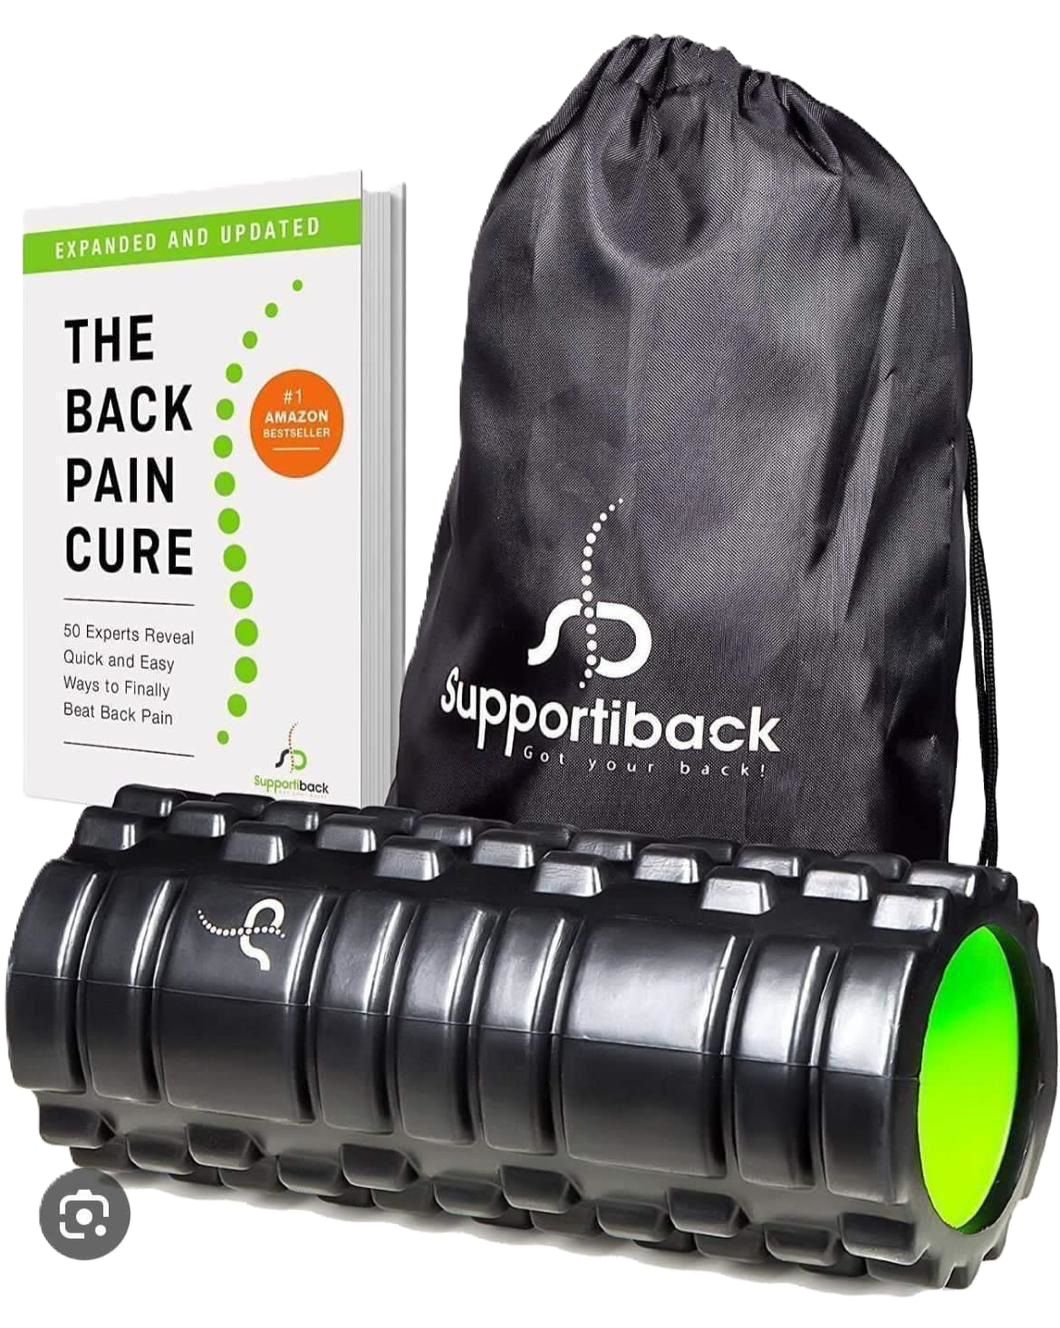 Support I back foam rollers